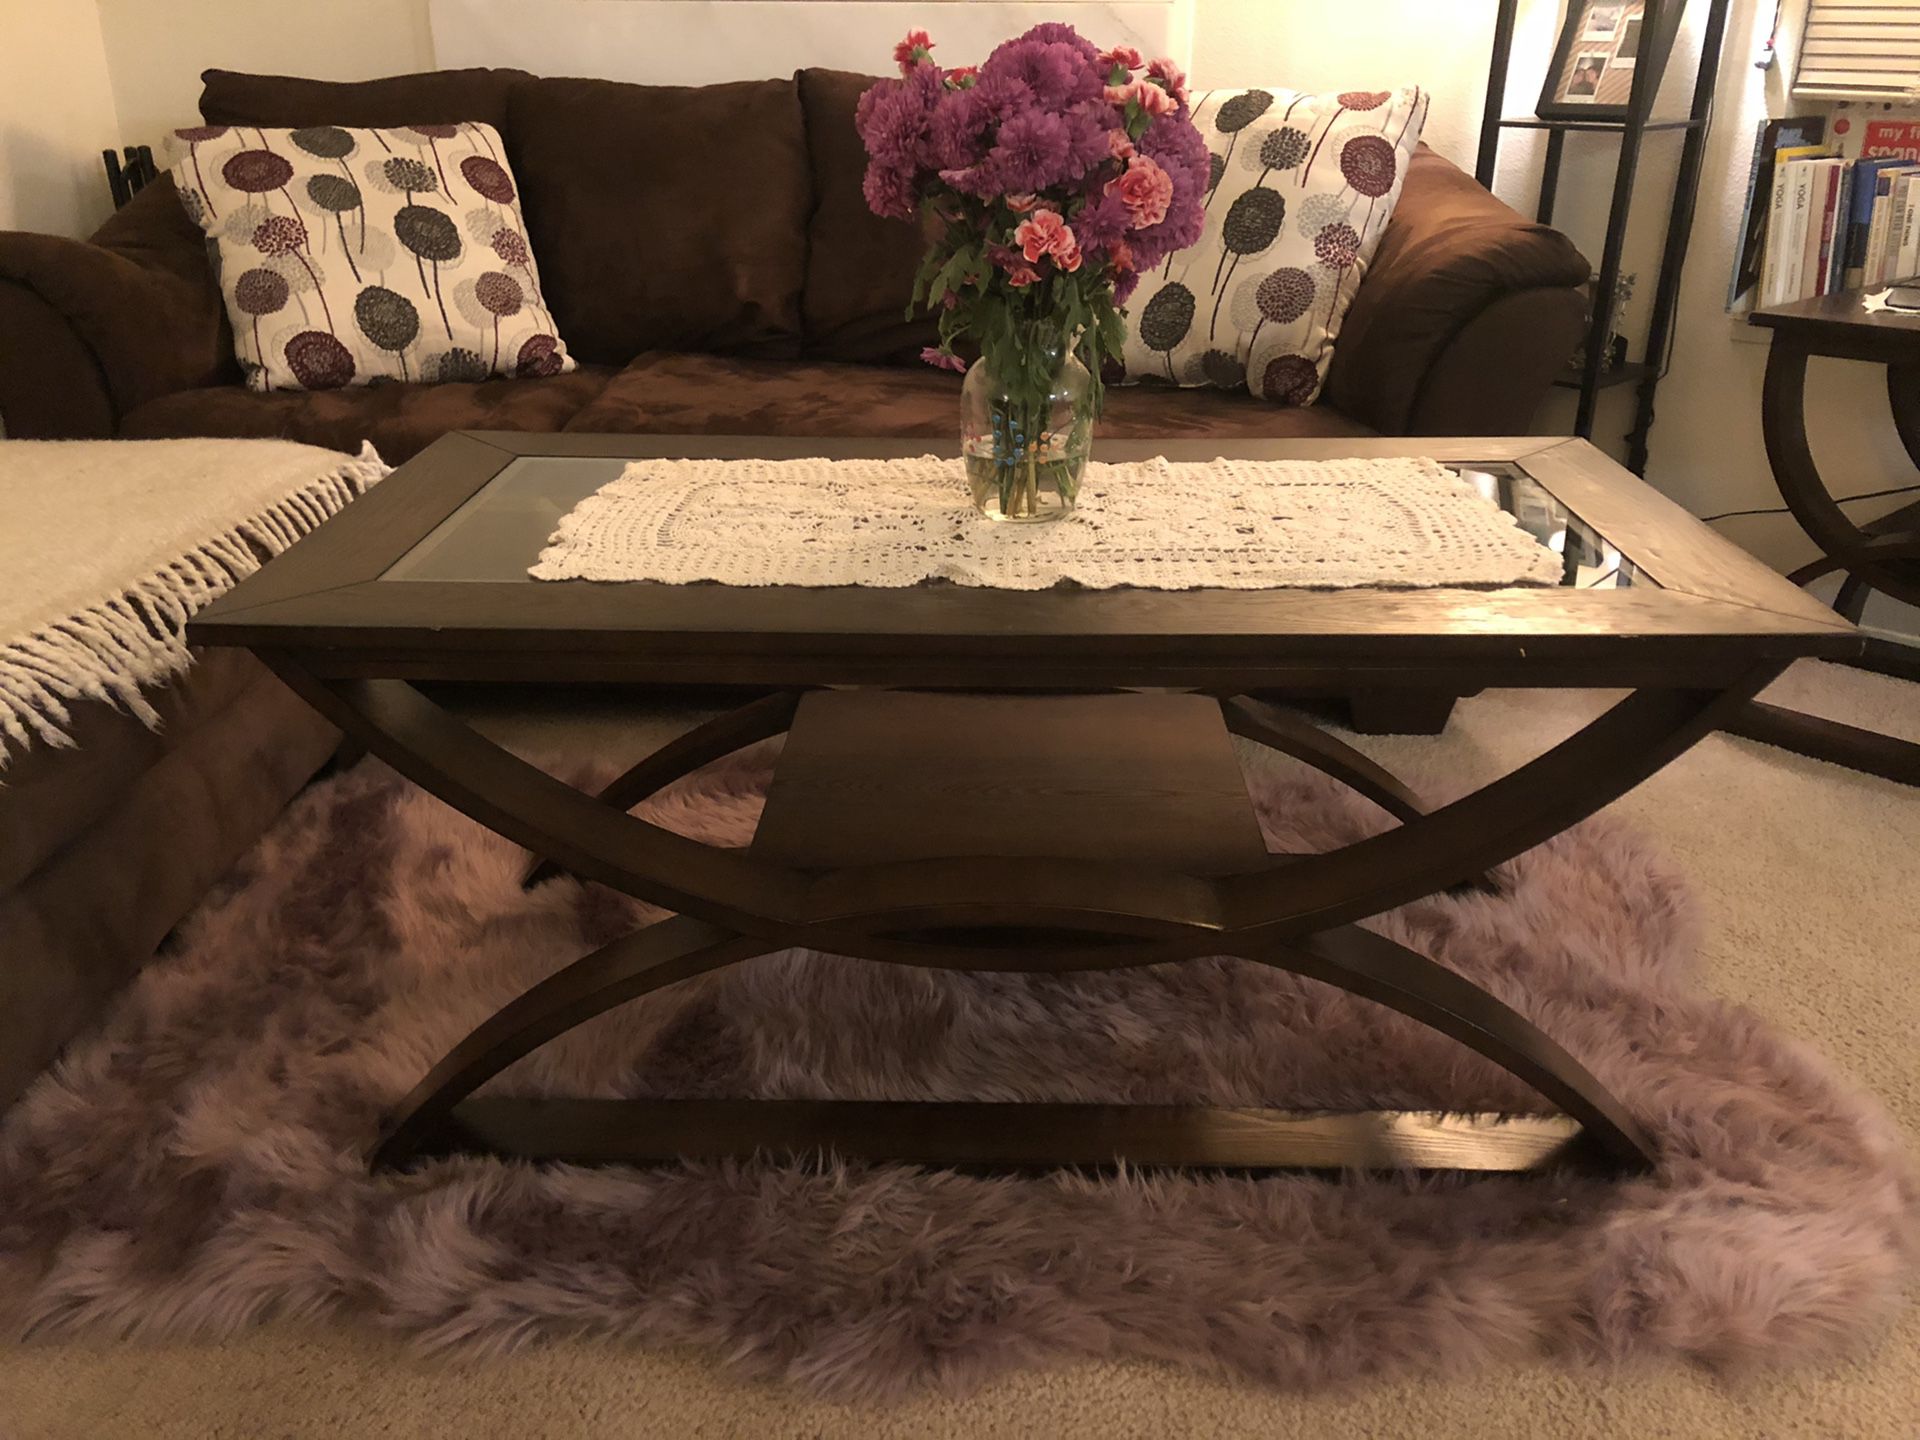 Coffee table & side table